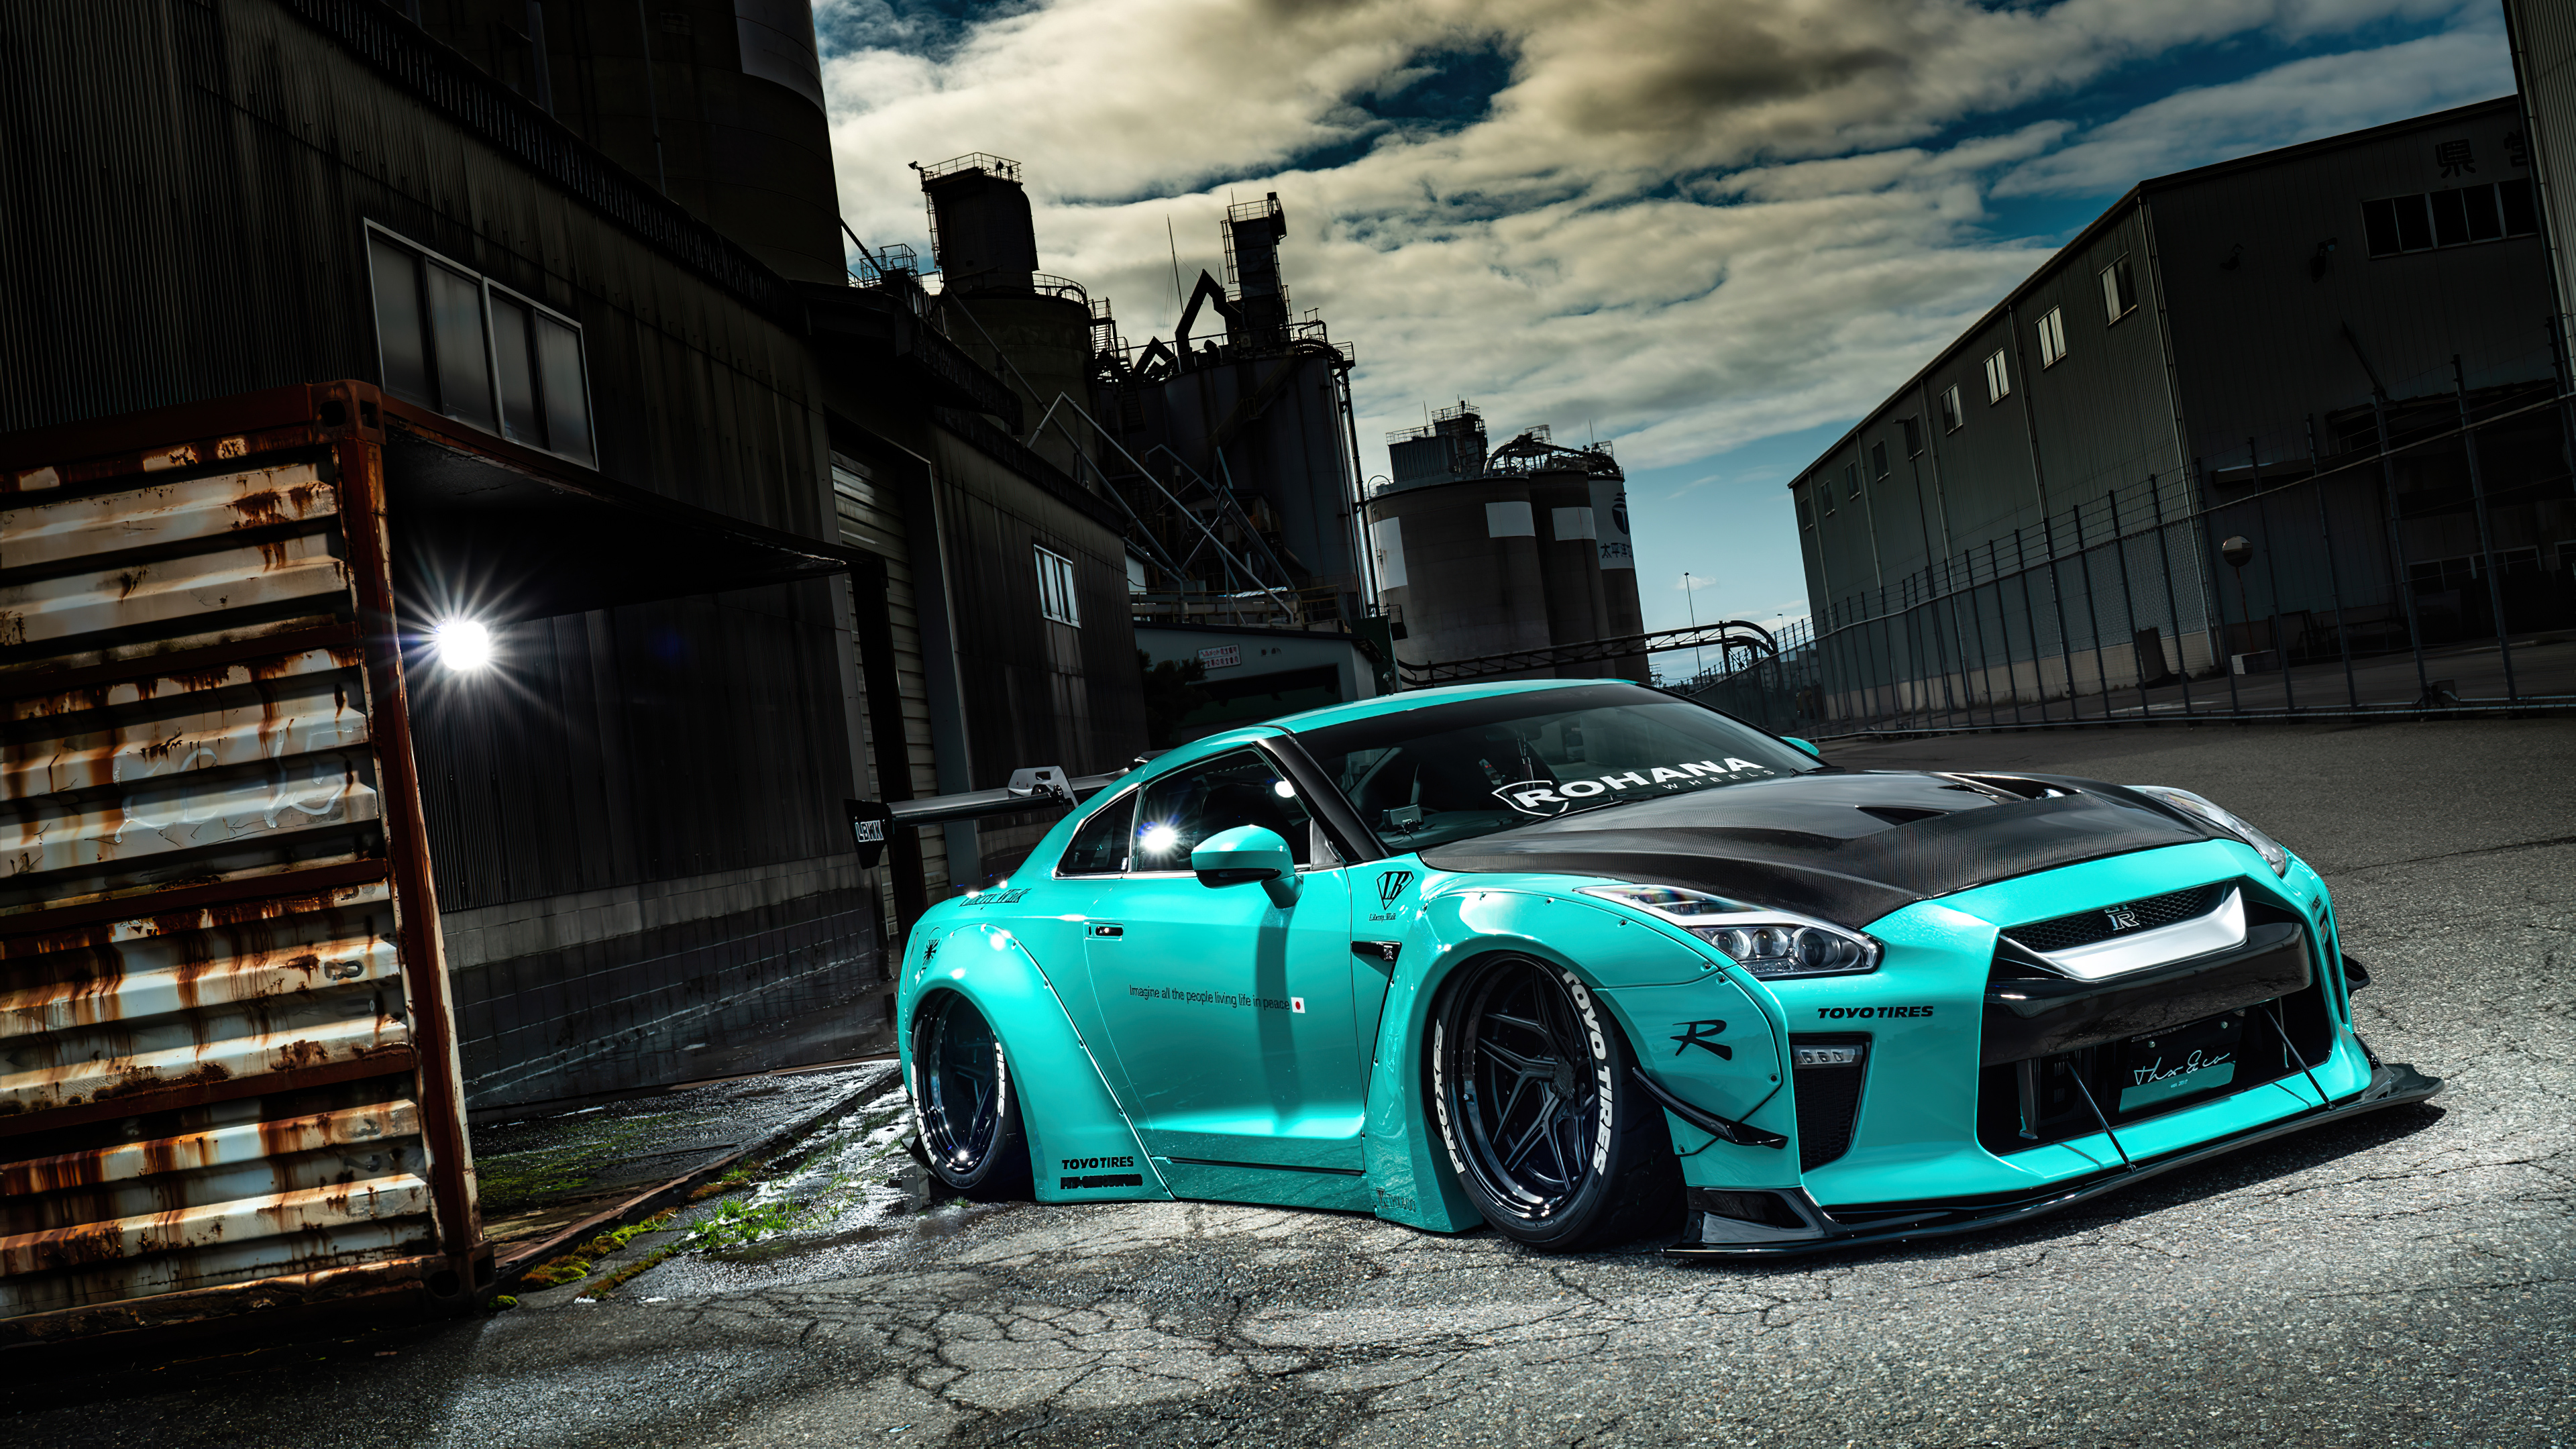 Nissan Gtr 2020, HD Cars, 4k Wallpapers, Images ...